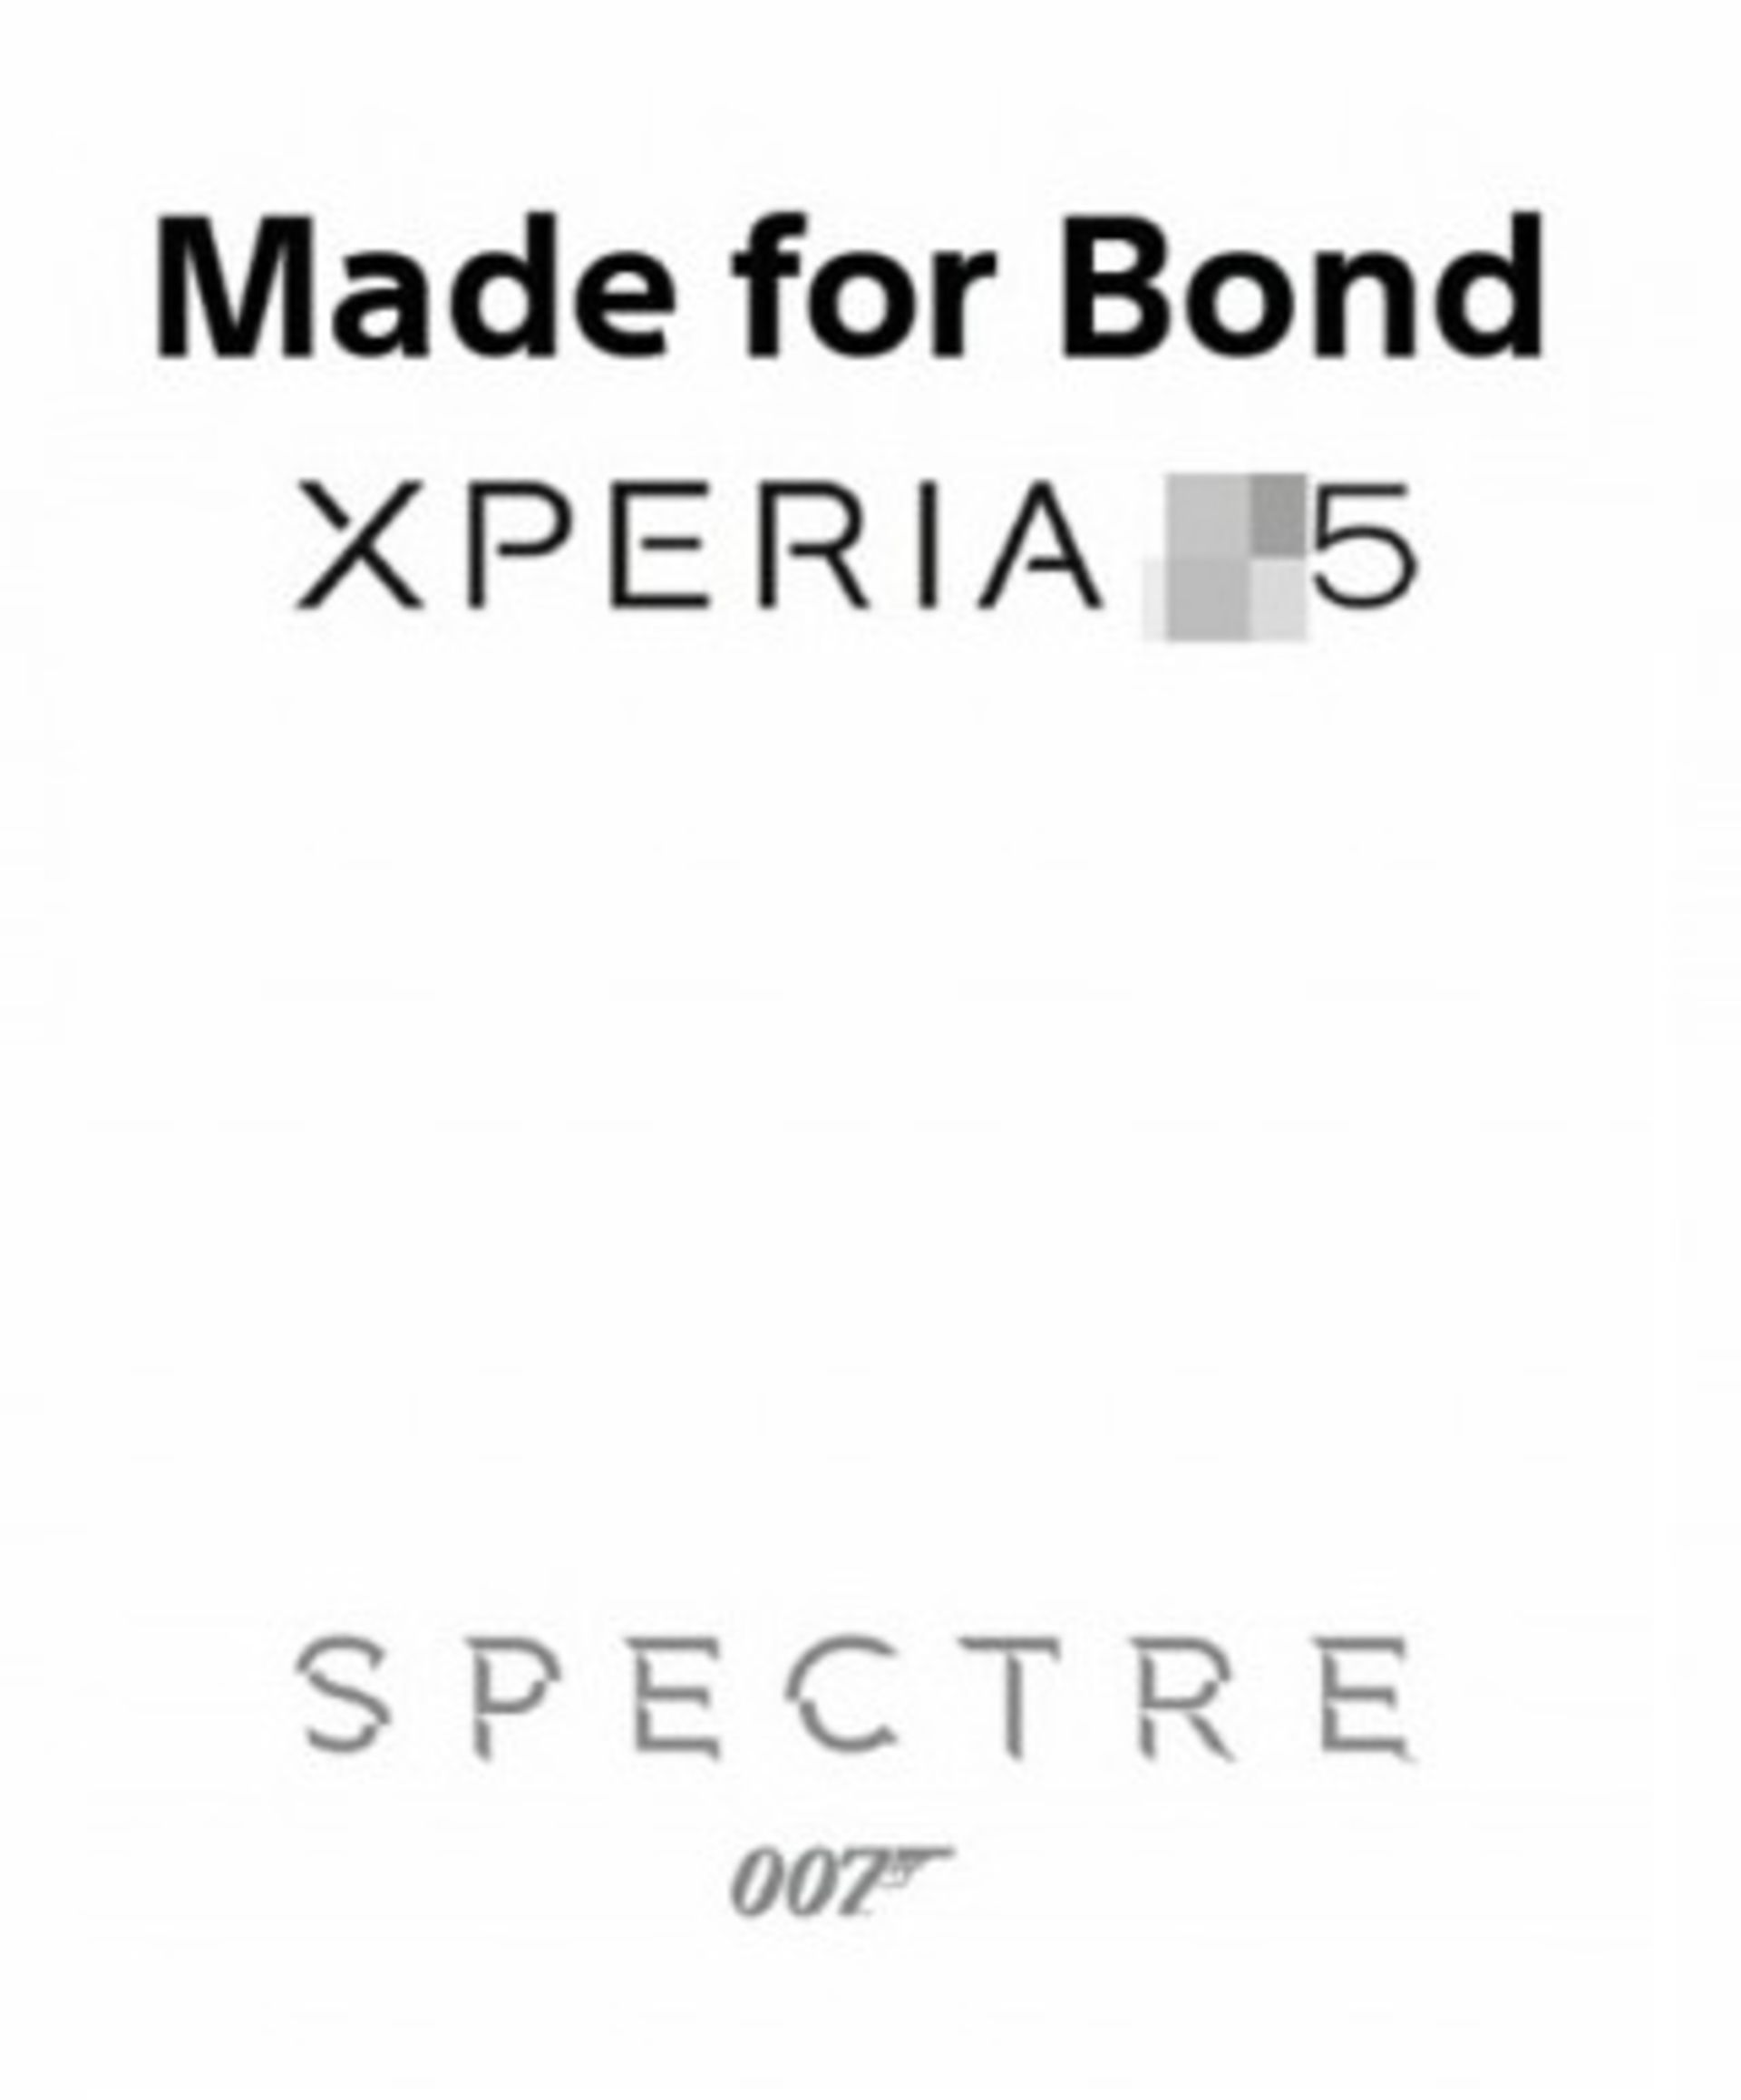 Is the Sony Xperia Z5 made for Bond